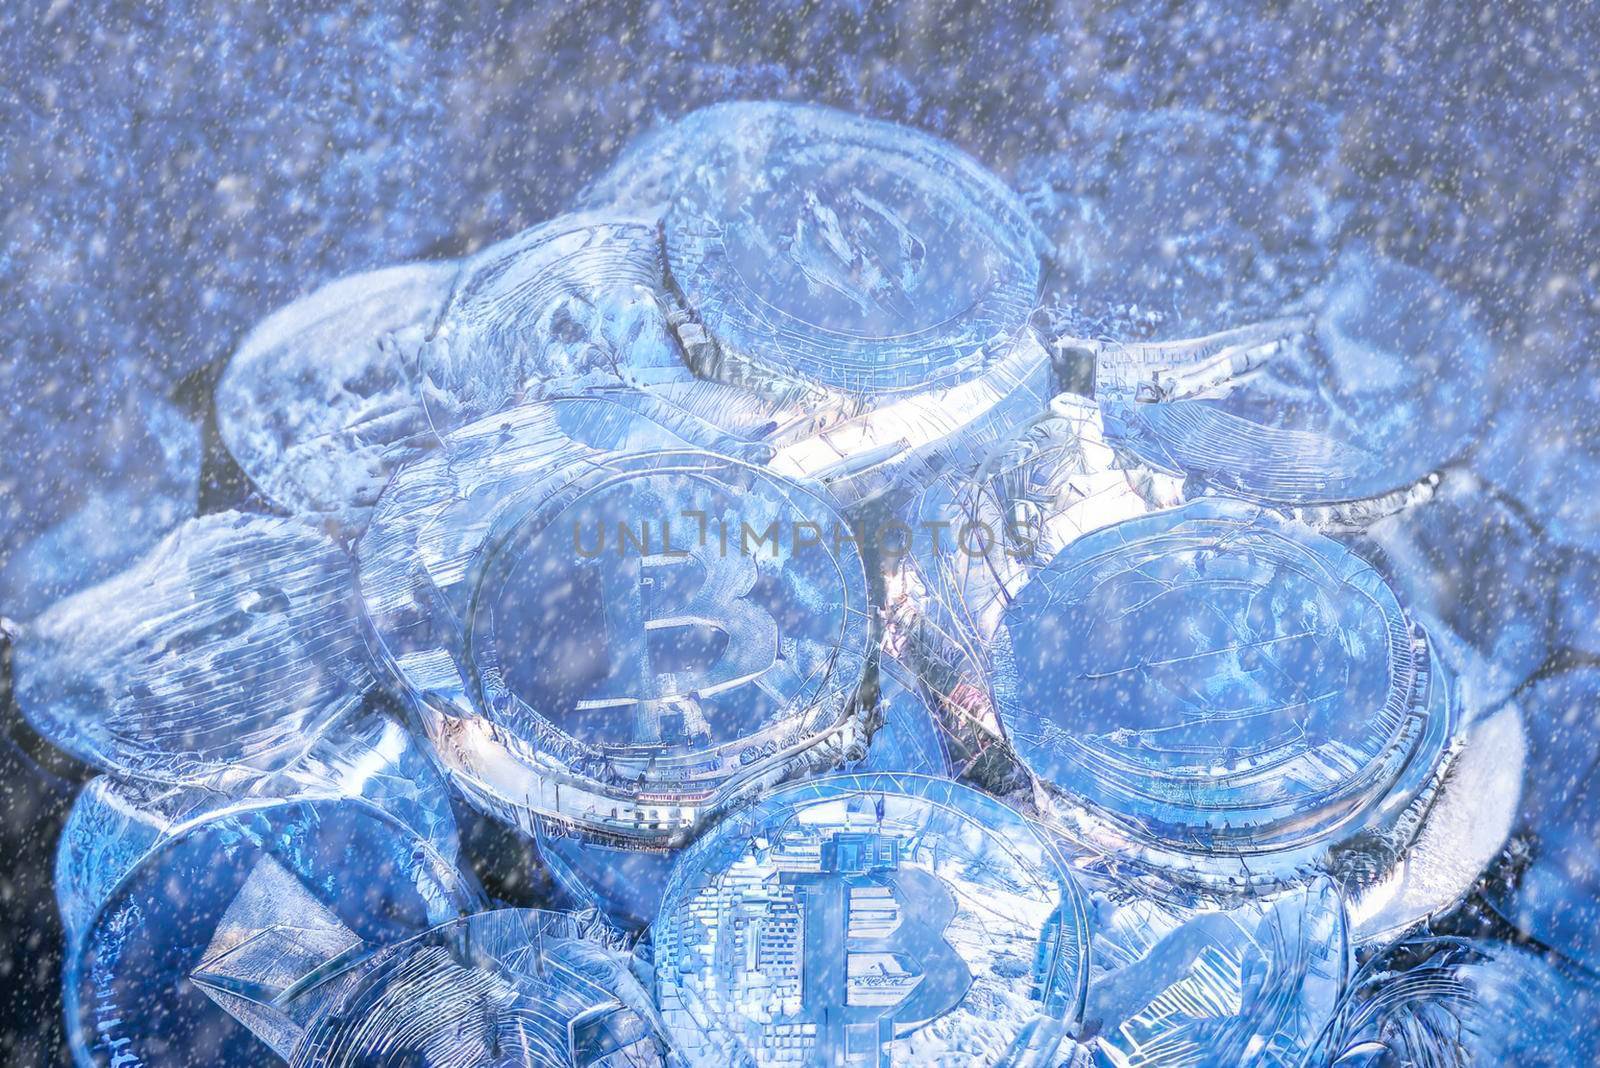 Concept for Crypto winter, Bitcoin in blue ice. Bitcoin price crash. Horizontal view of cryptocurrency tokens, including Bitcoin, Ethererum Ripple, and Litecoin saw from above on blue shiny texture background